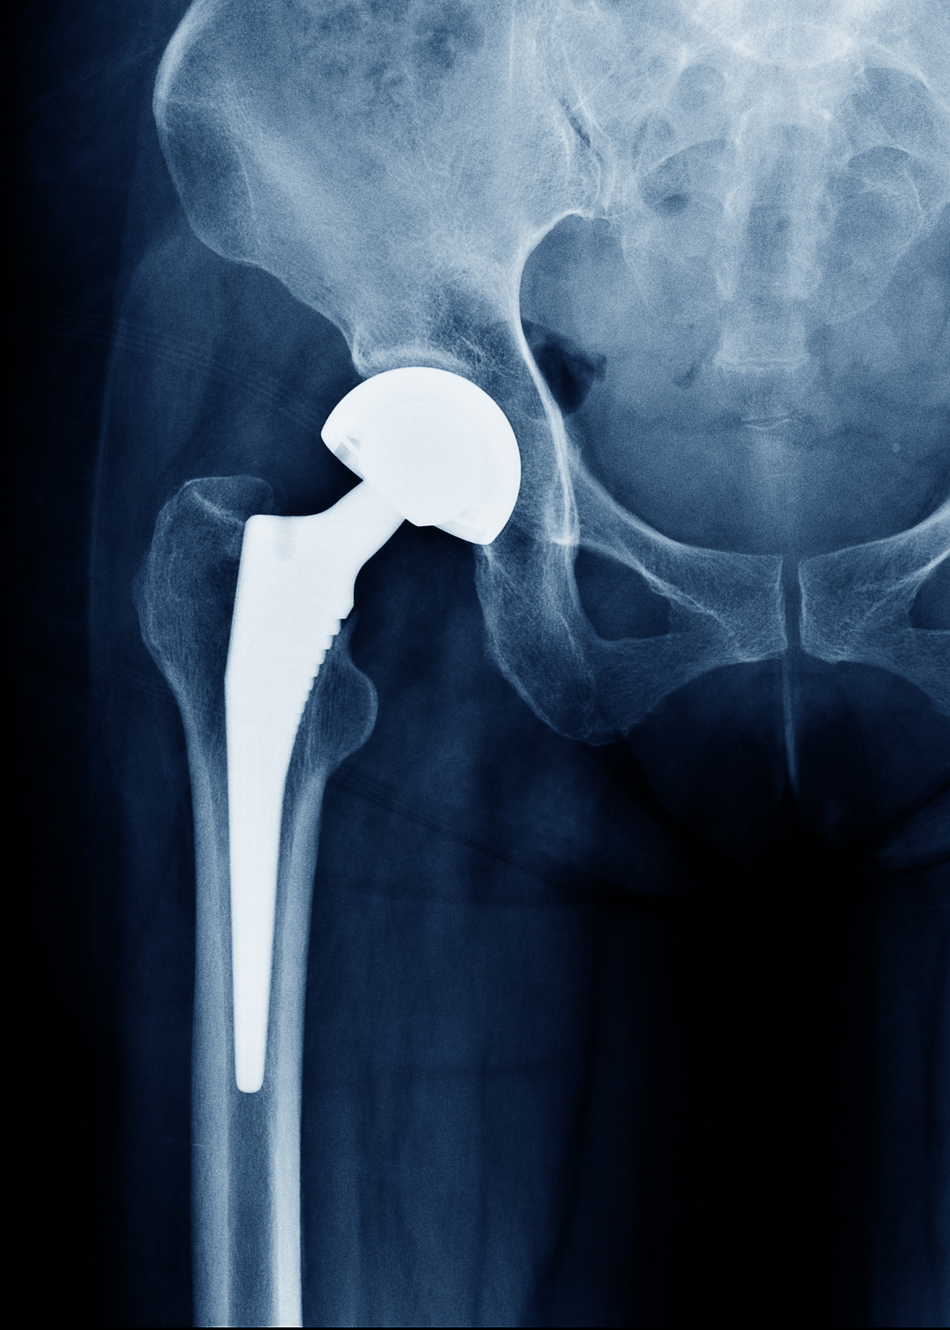 How to Take Care of Your Joint Replacement